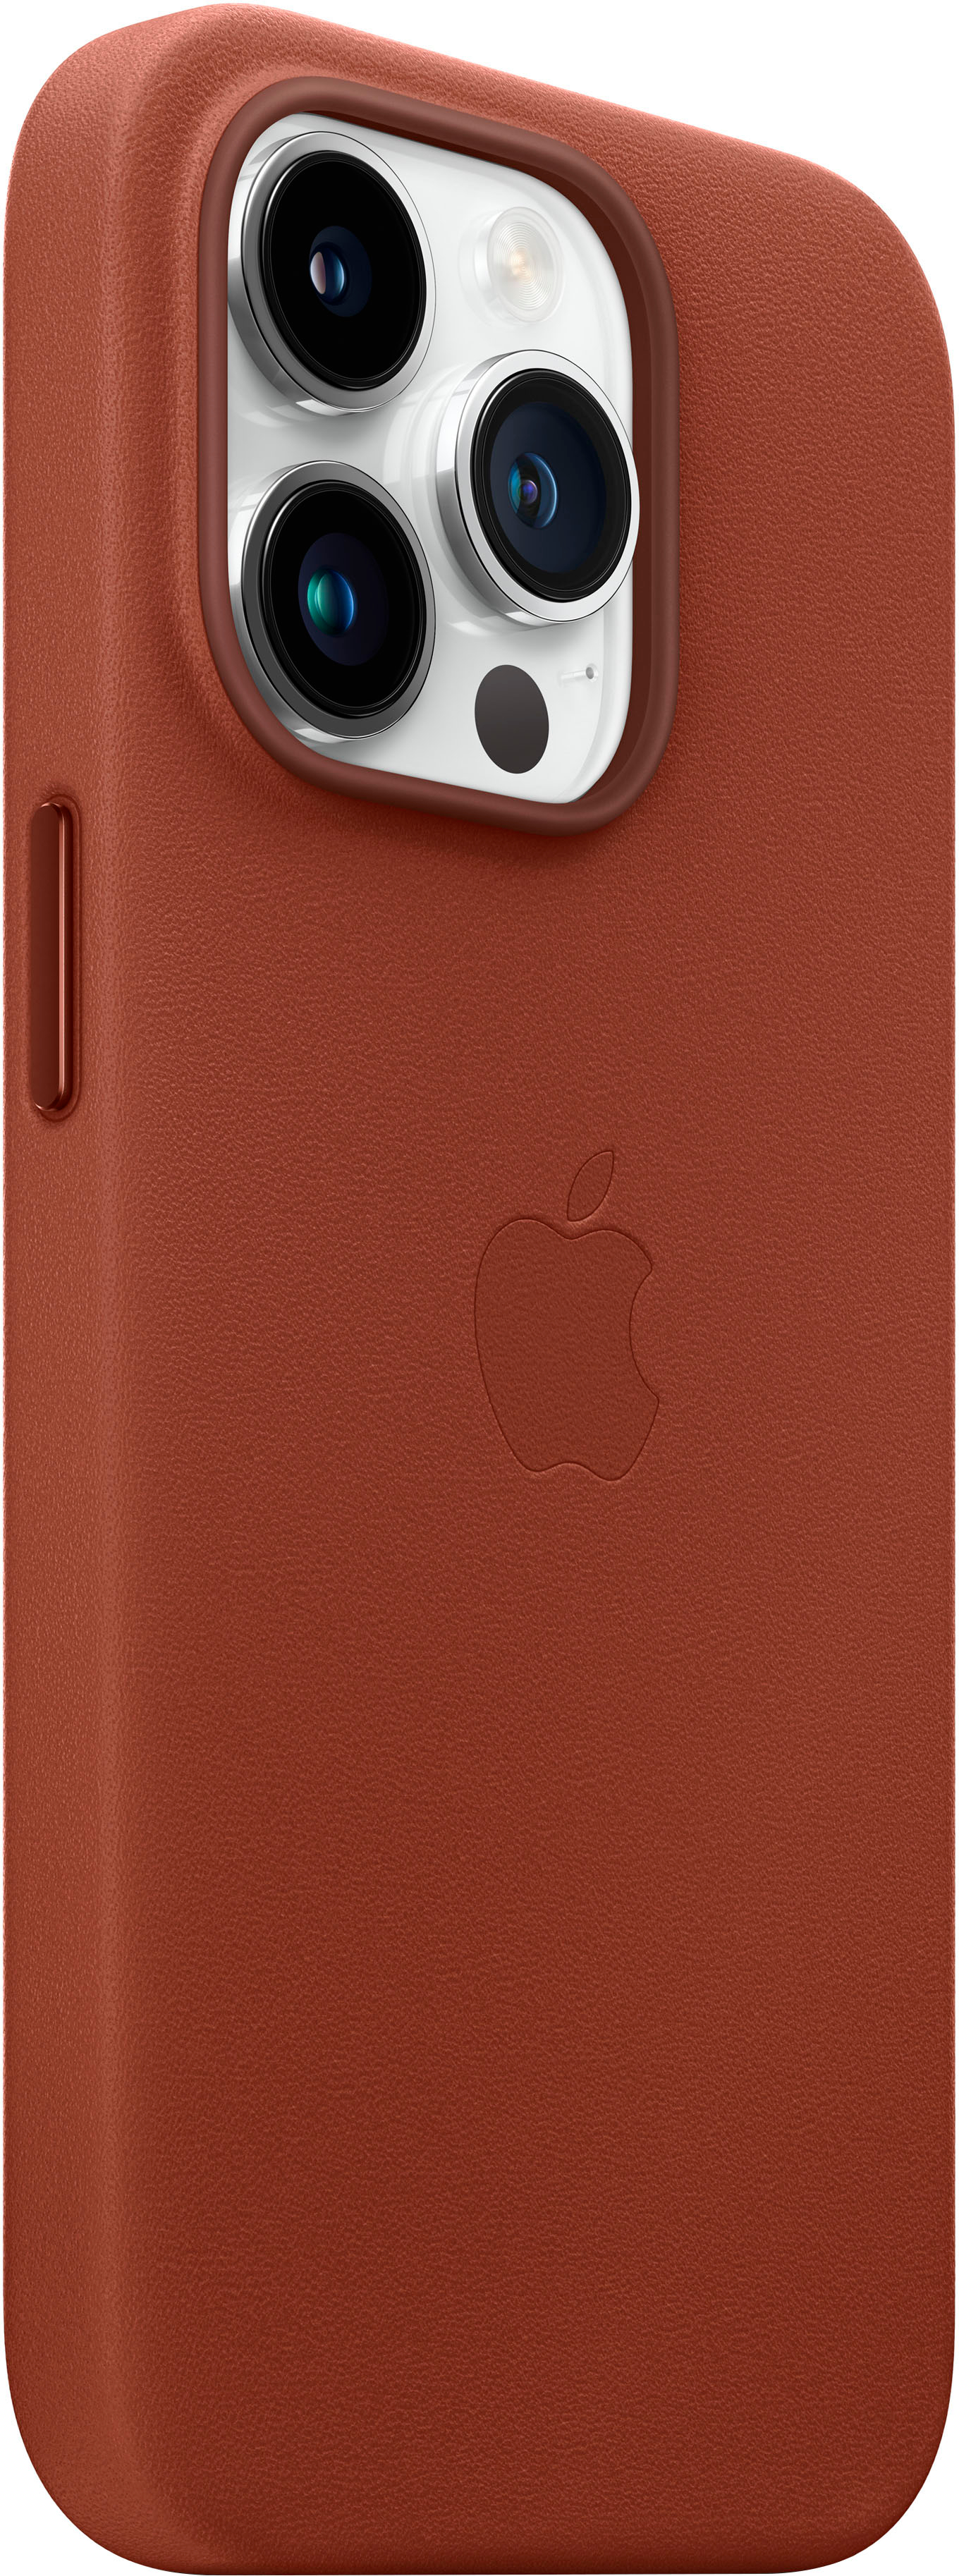 iPhone Leather Wallet with MagSafe - Umber